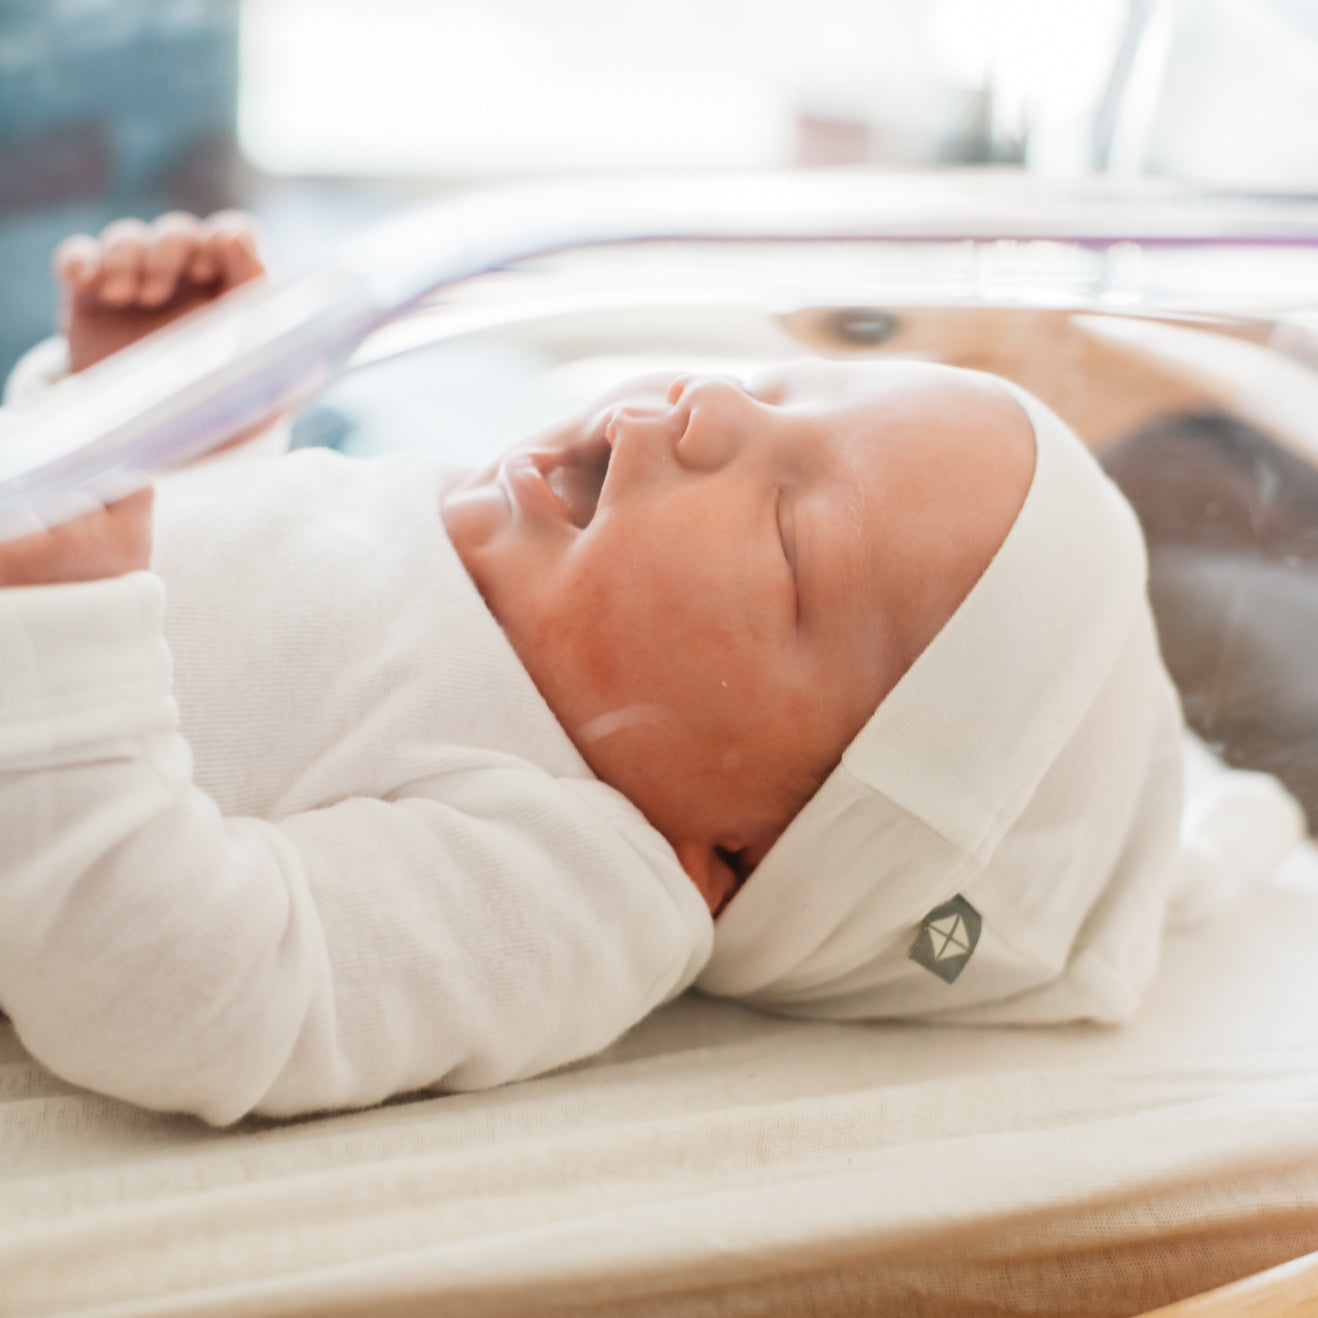 newborn baby in the hospital wearing a onesie and a hat